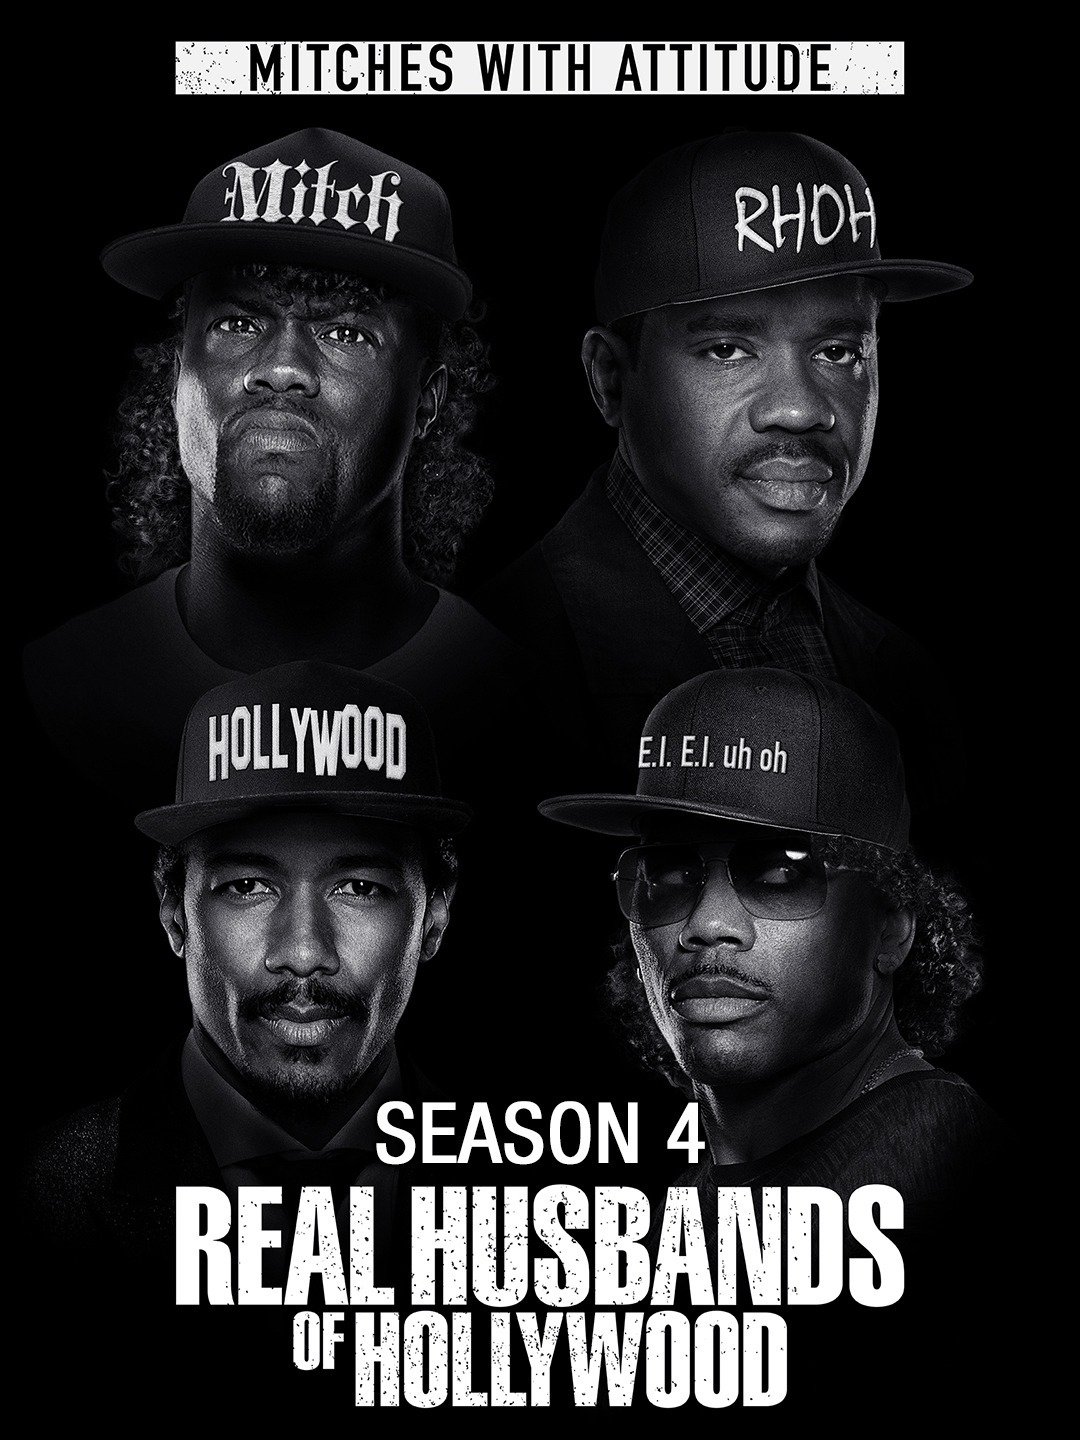 watch love and hip hop hollywood season 4 episode 6